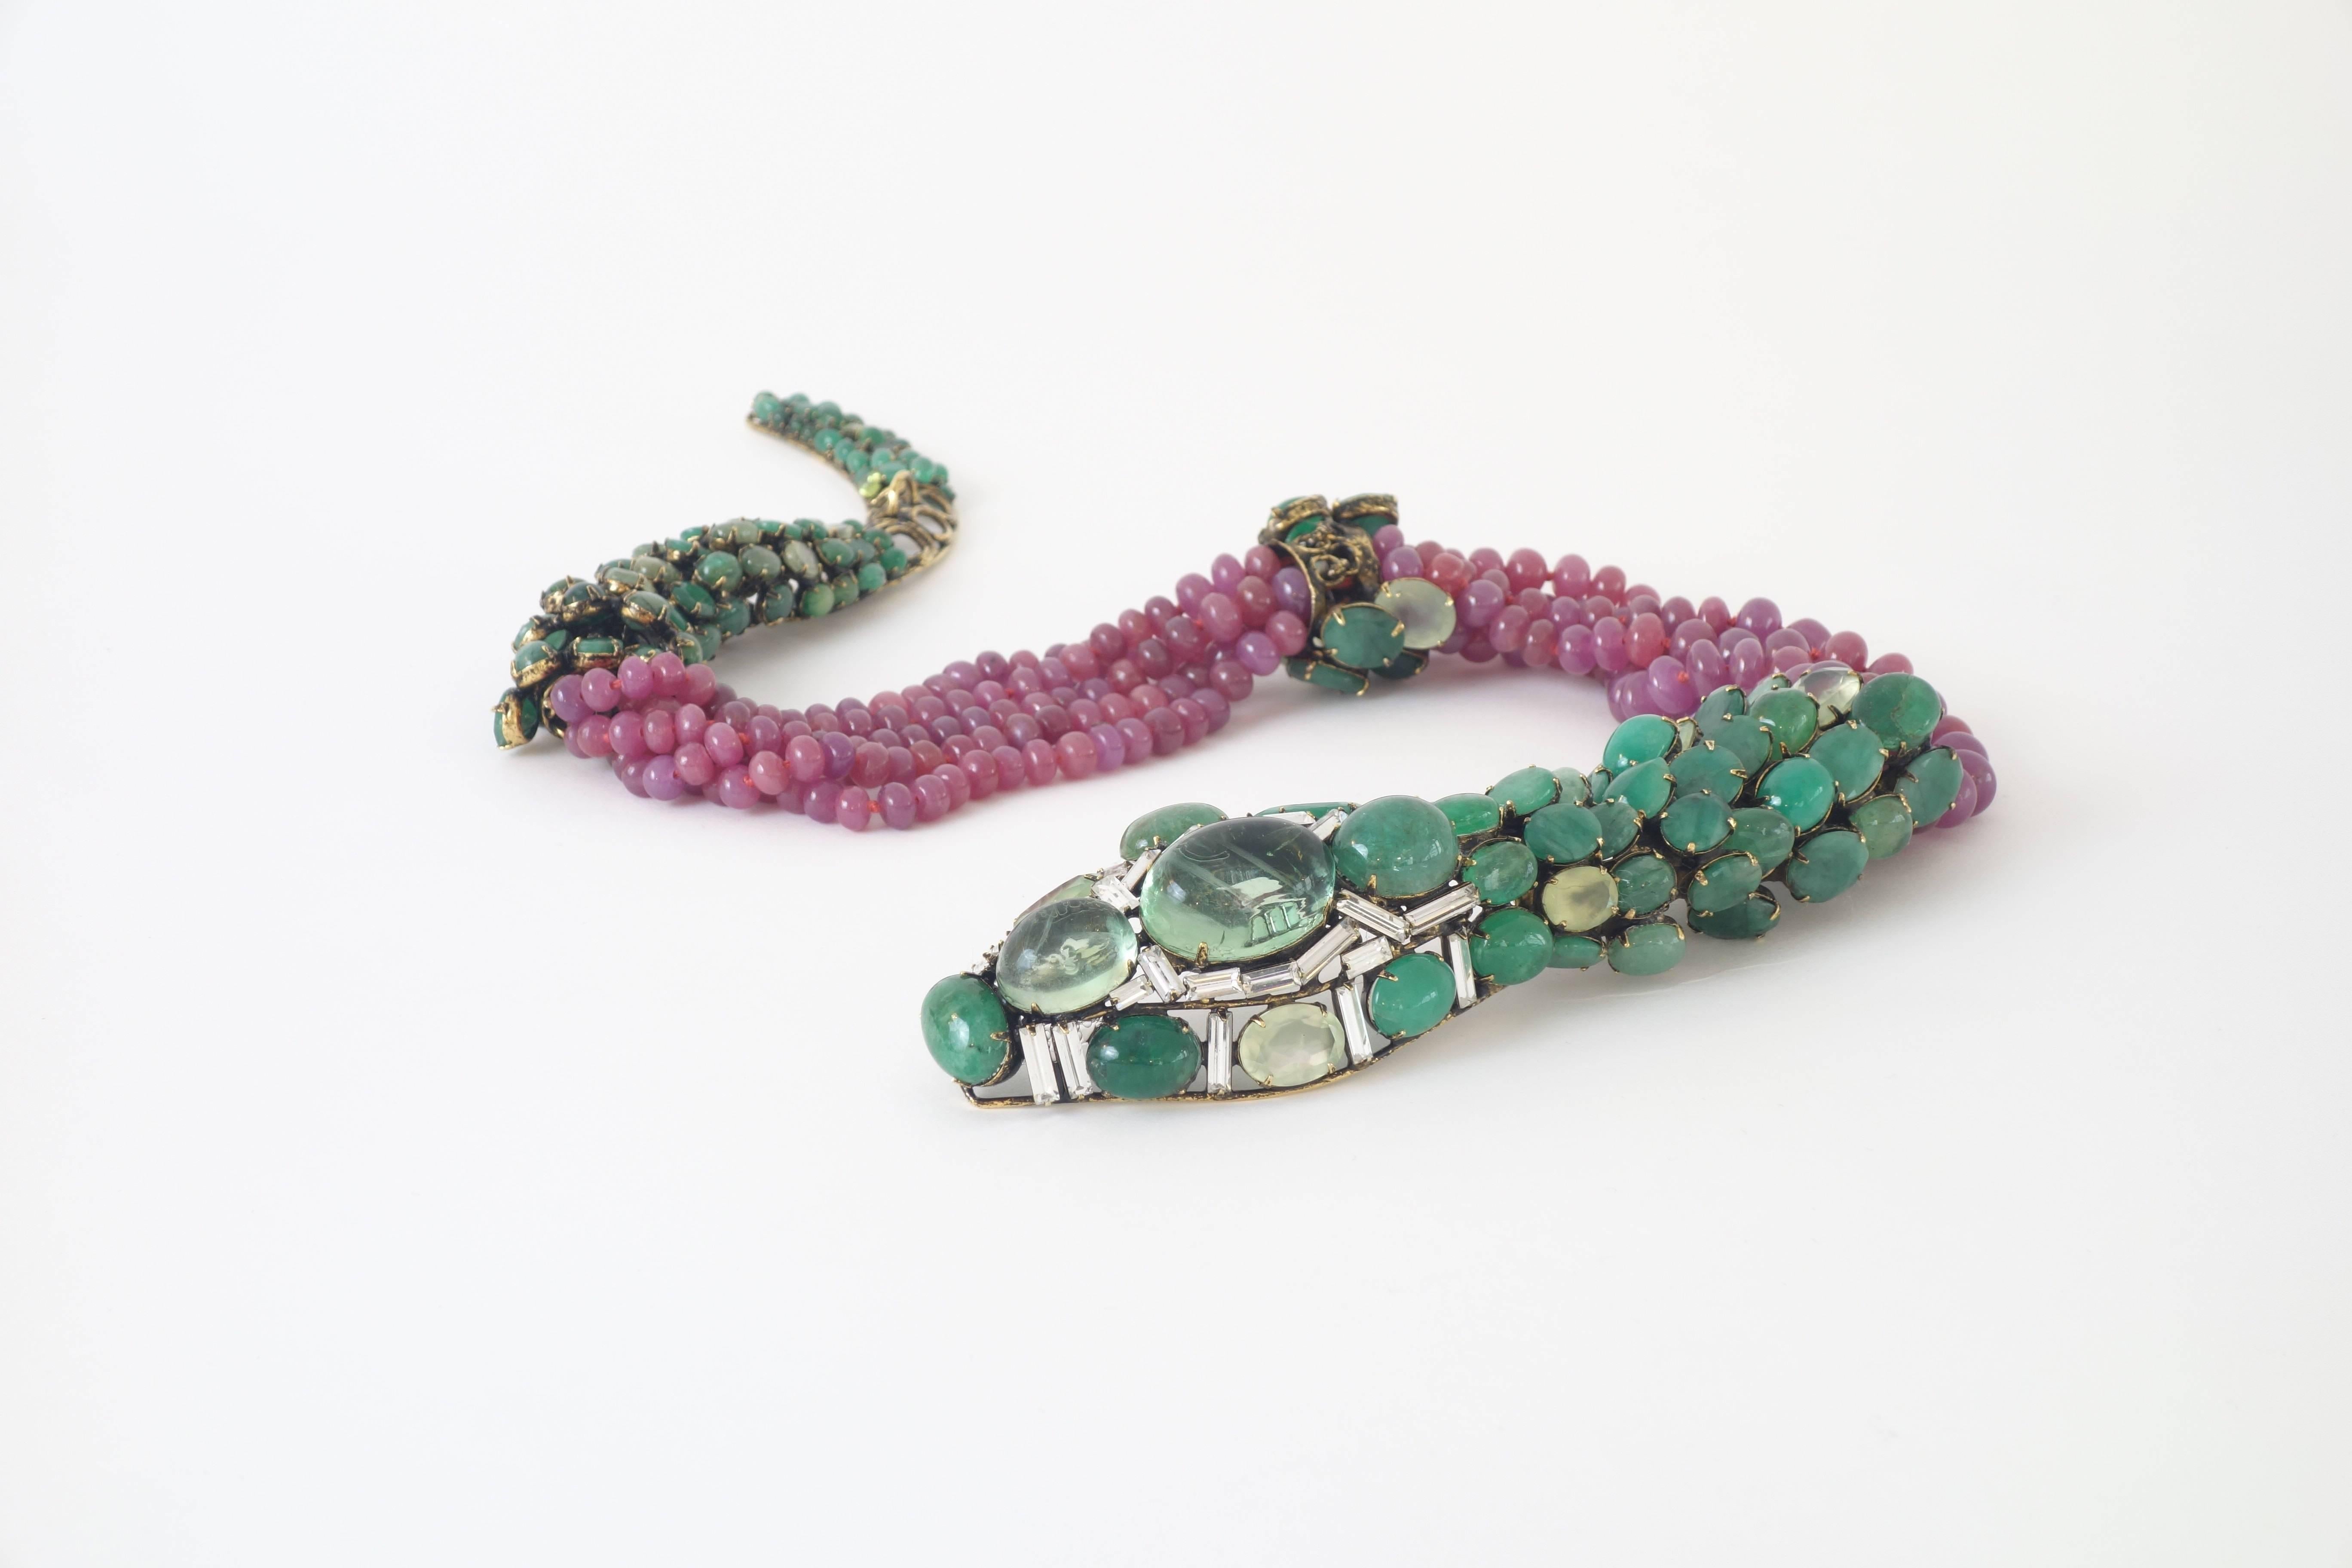 Snake necklace by Iradj Moini, with a blend of emerald, ruby and Swarovski crystal.